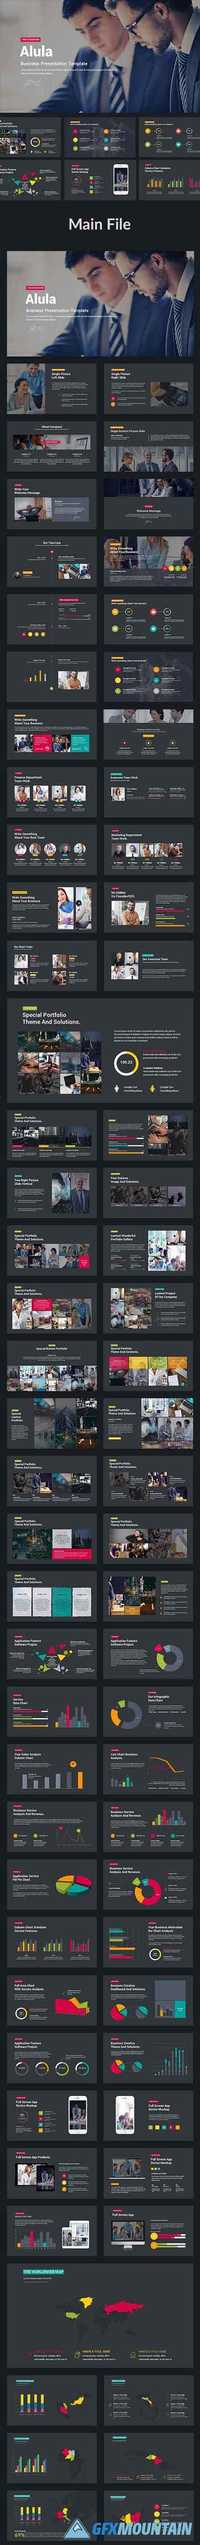 Alula - Business Powerpoint Template 19773128